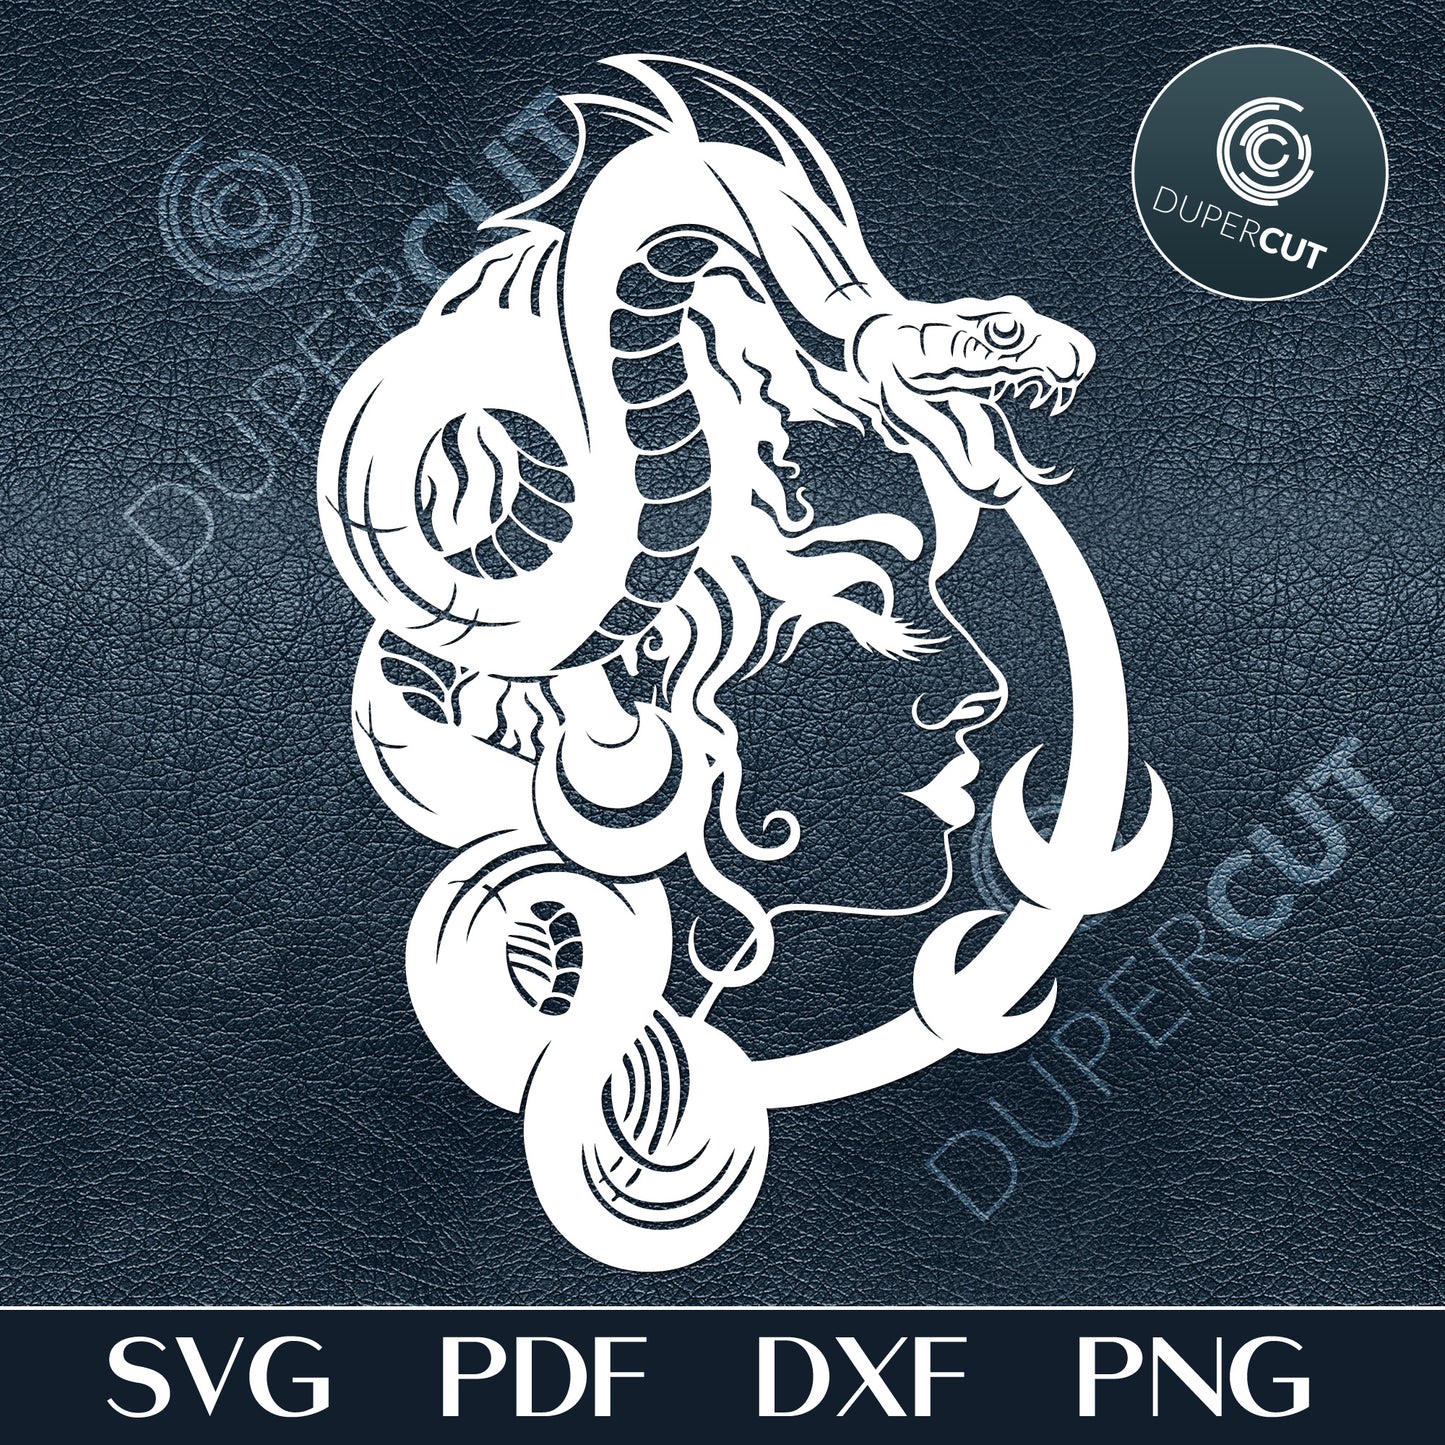 Woman with snake on head. Tatto steampunk design. SVG PNG DXF files Paper cutting template for personal or commercial use. Vinyl template cutting files for Cricut, Glowforge, Silhouette, CNC